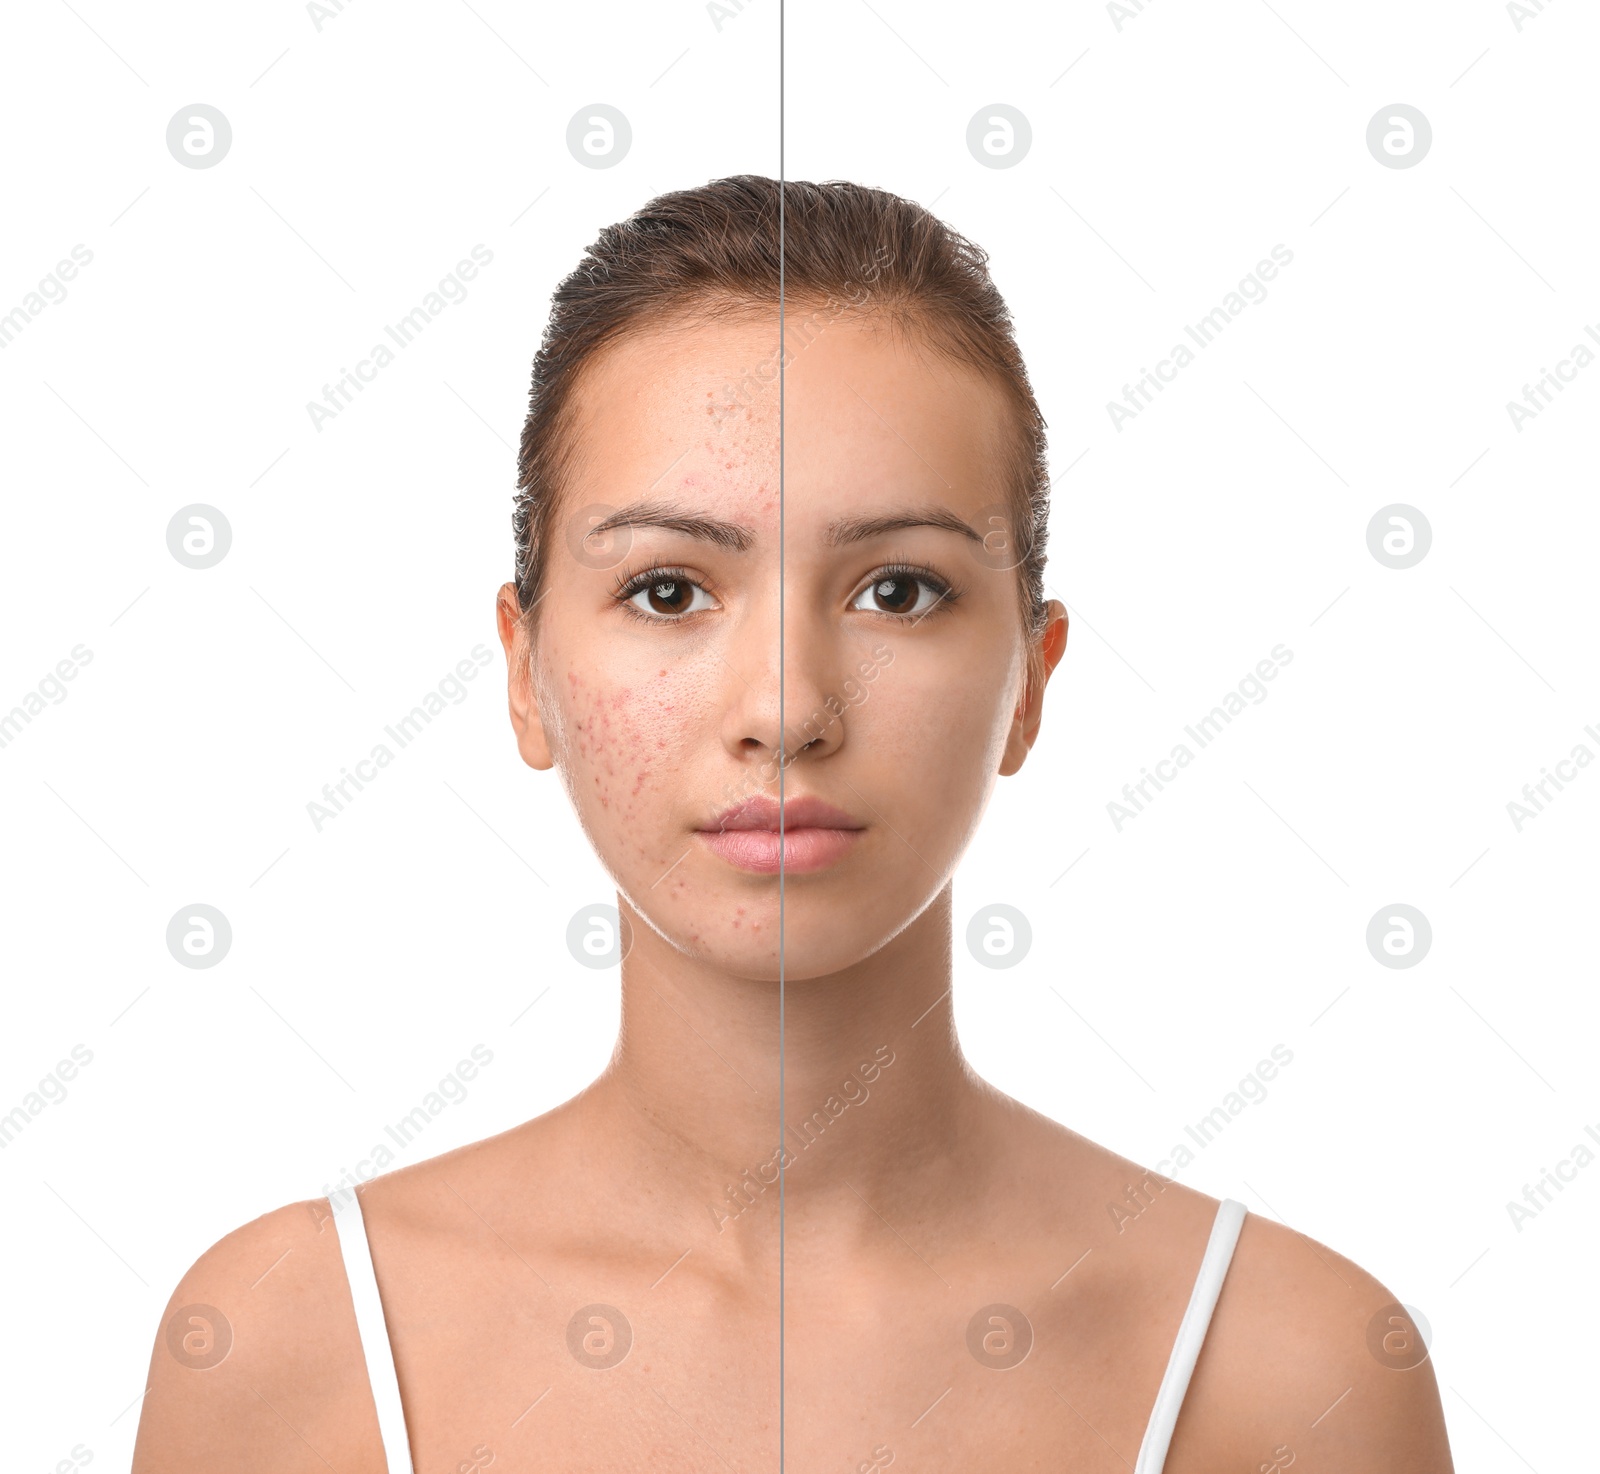 Image of Teenage girl before and after acne treatment on white background